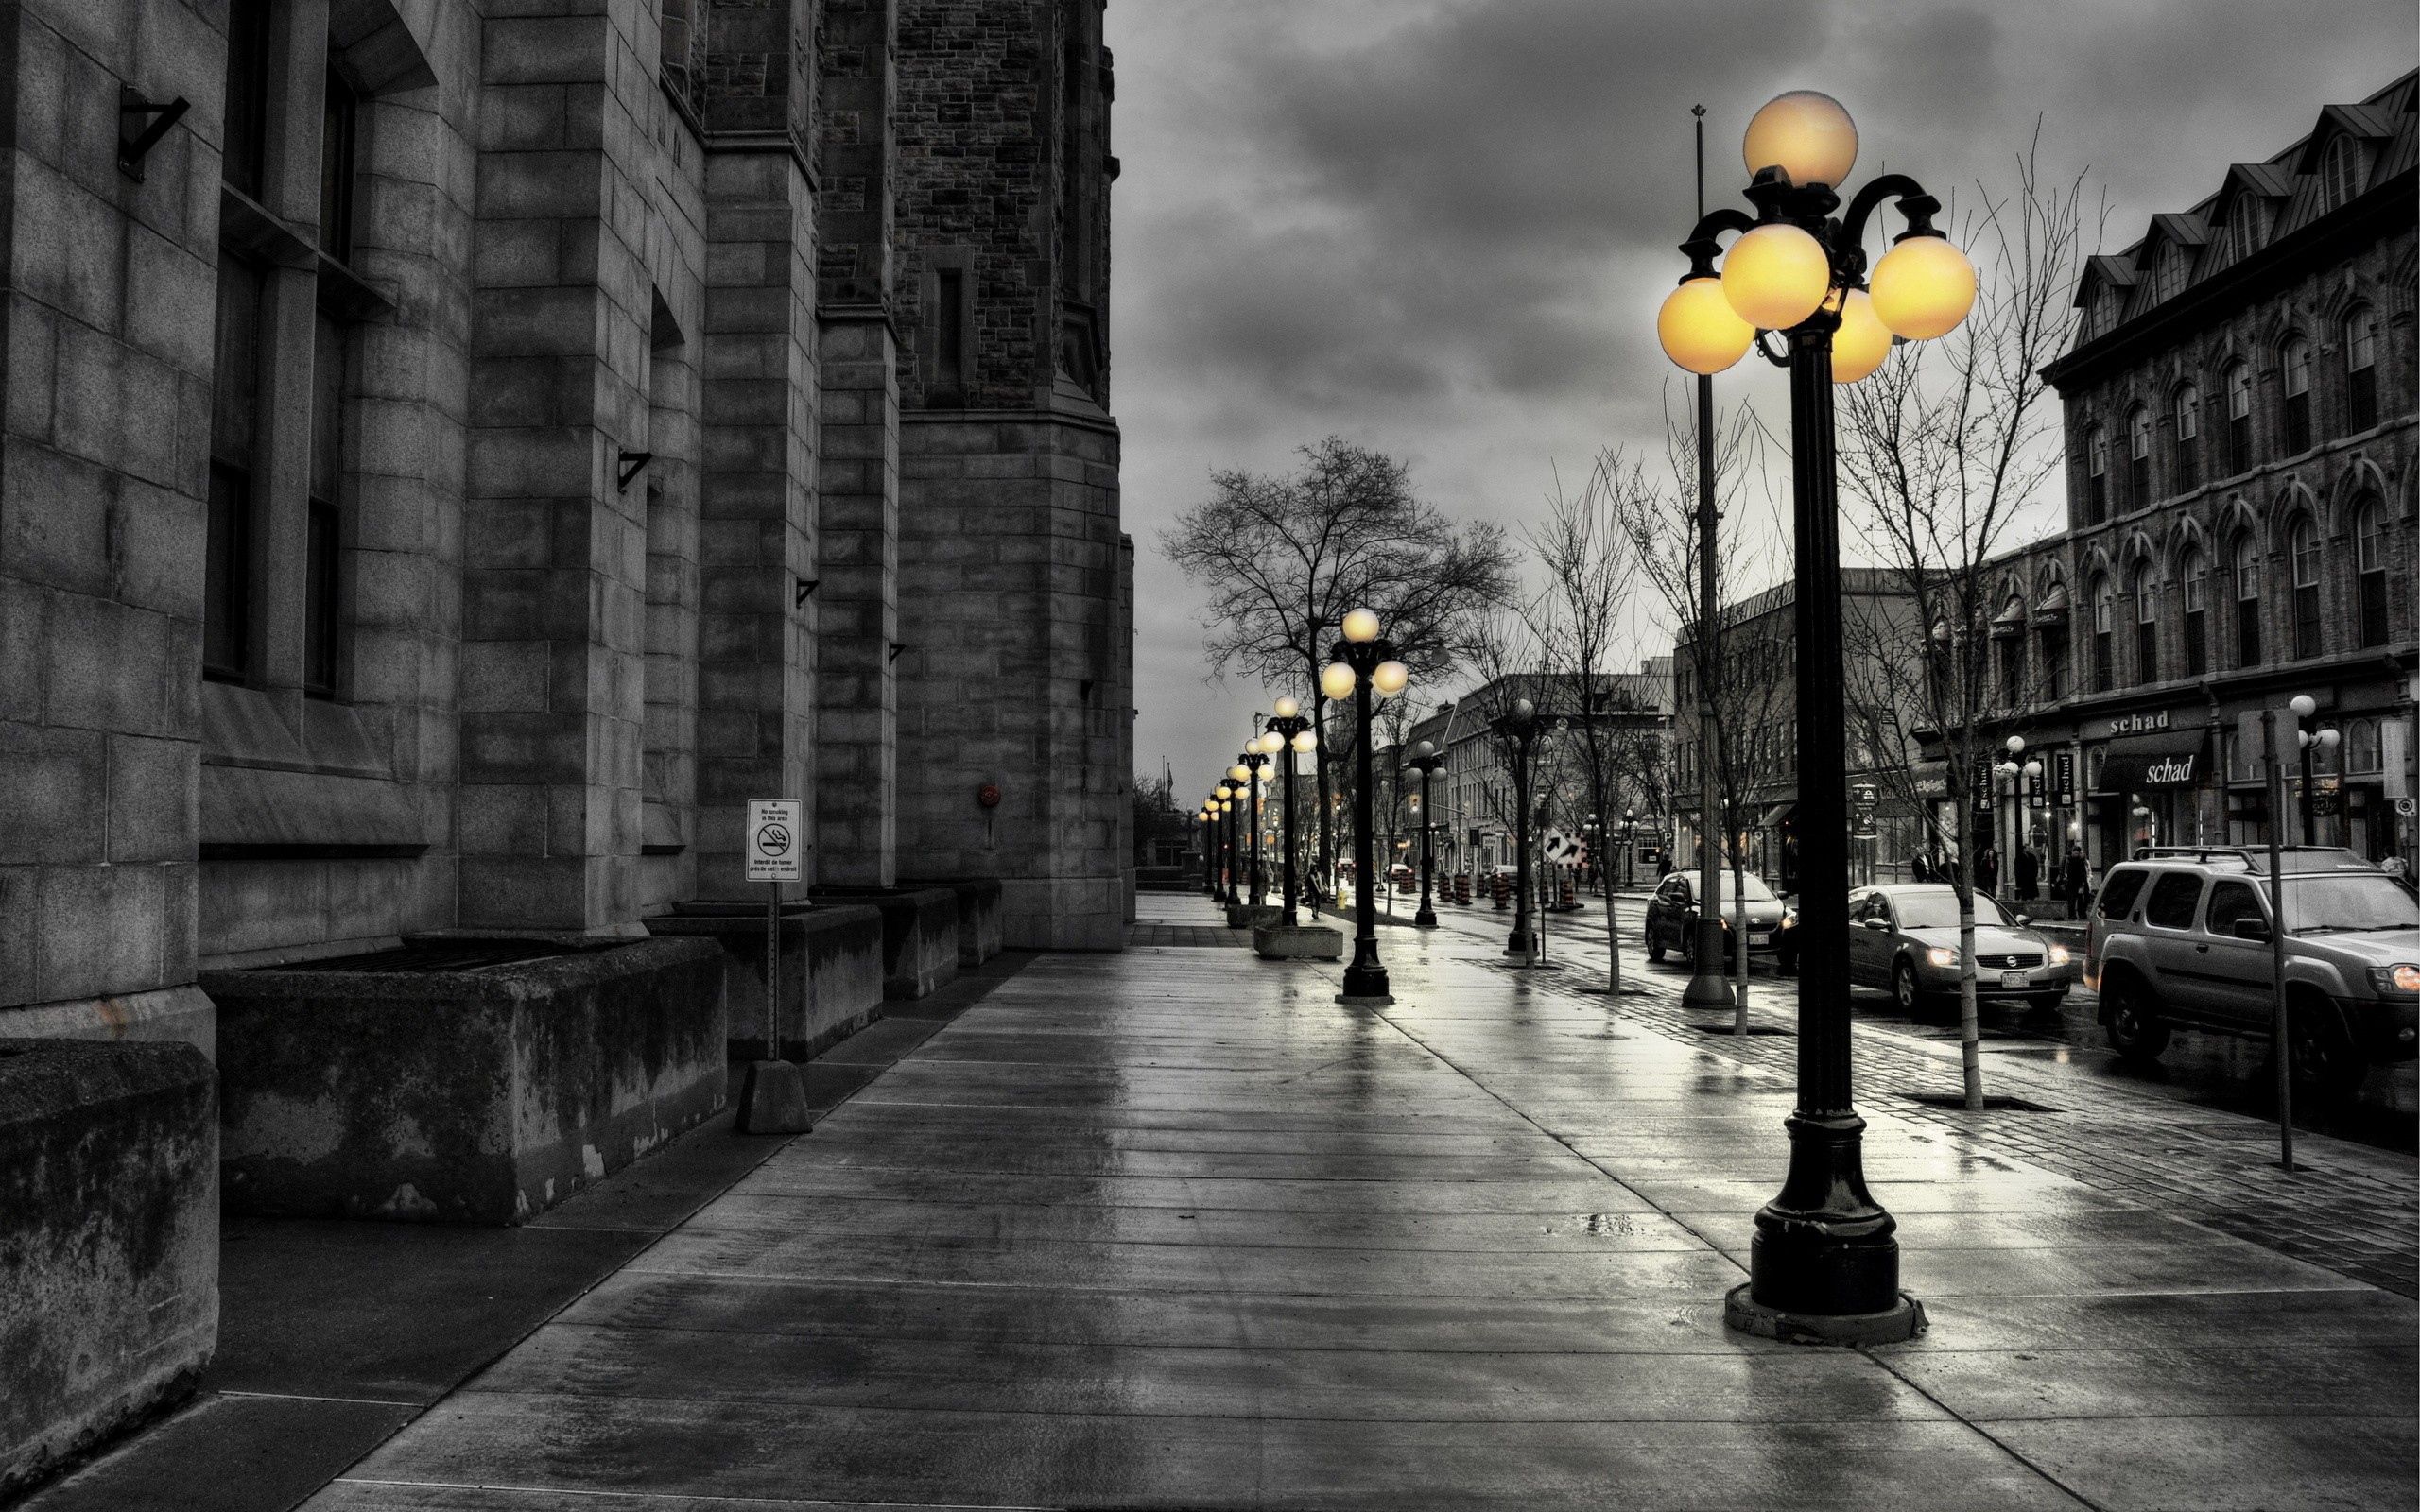 wallpapers cities, city, building, lights, lanterns, evening, bw, chb, hdr, street